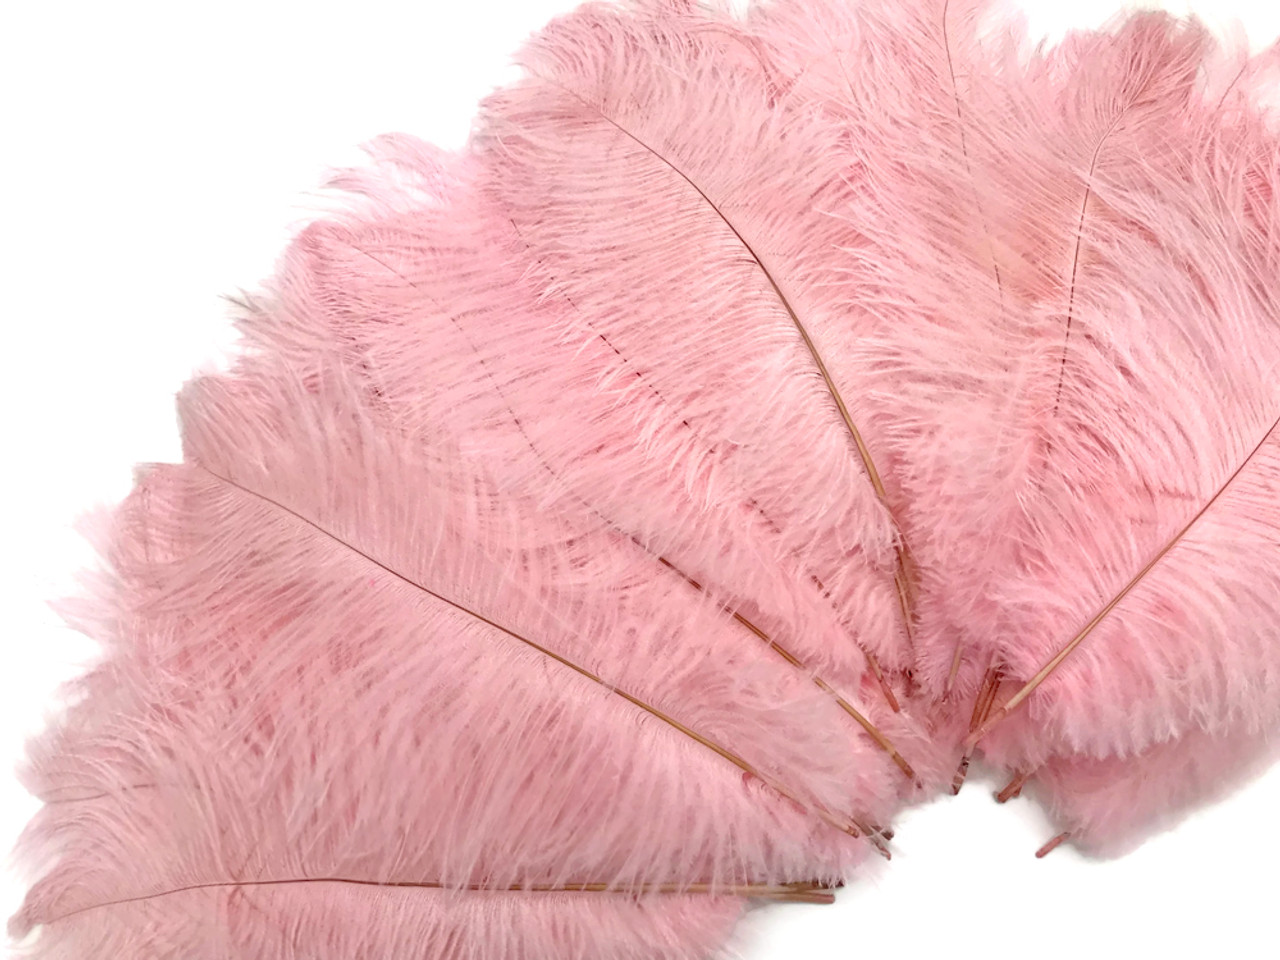 USA Shop BABY PINK Ostrich Feathers 13 to 18 Inches Long. 